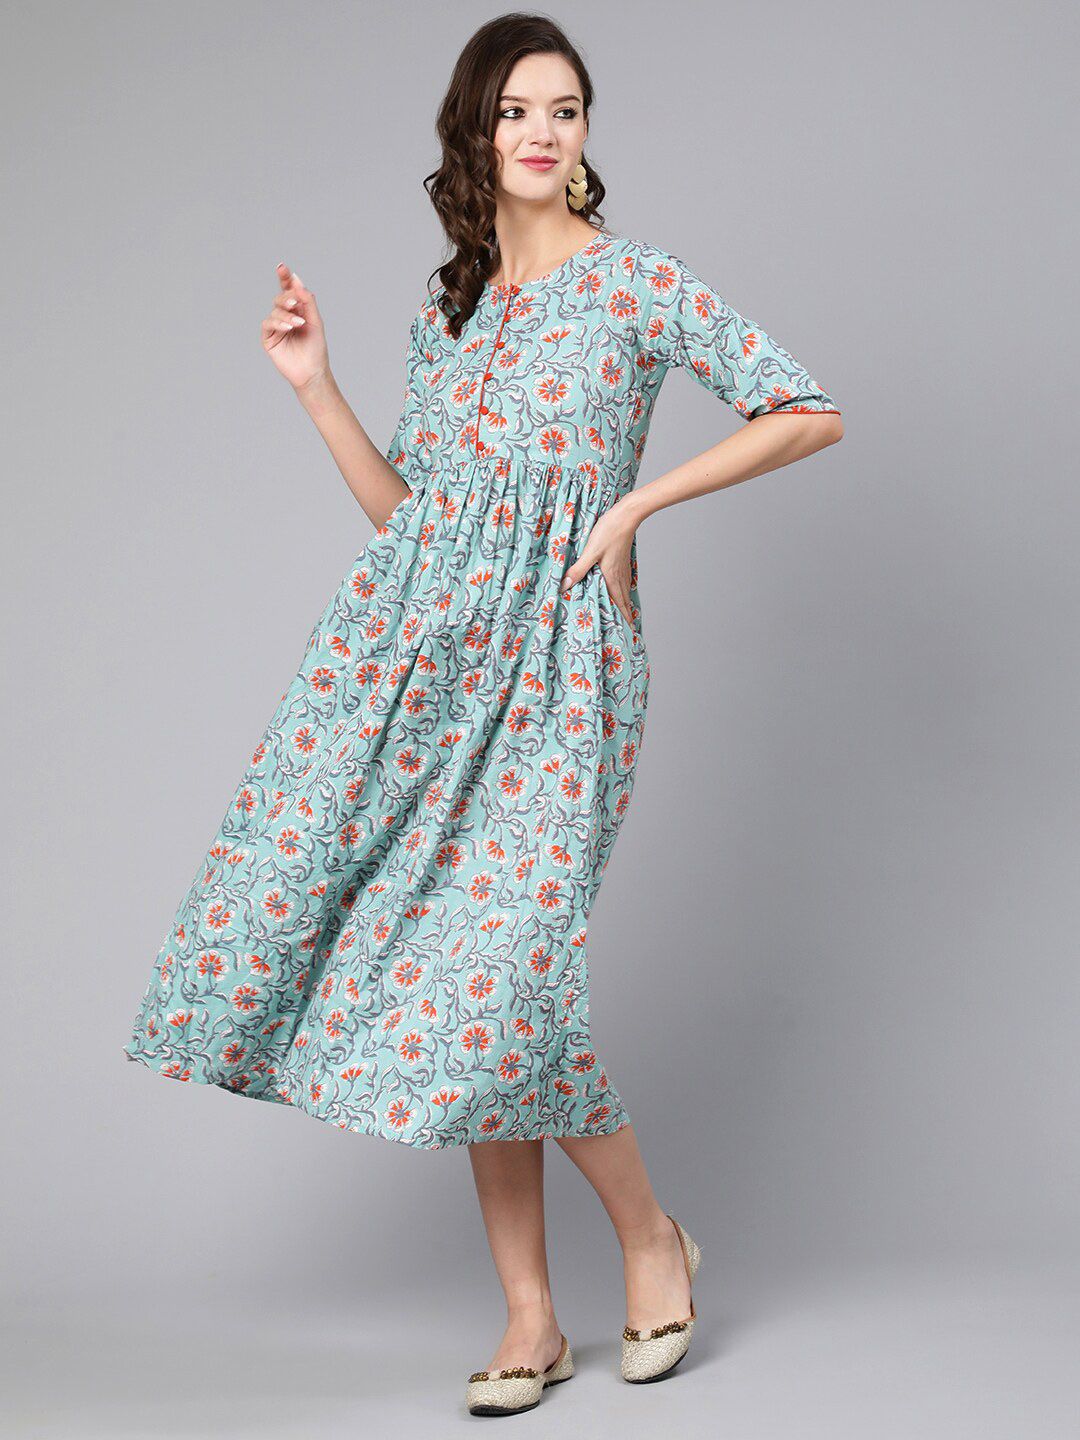 Nayo Green Floral Ethnic Printed Flared  A-Line Midi Dress Price in India